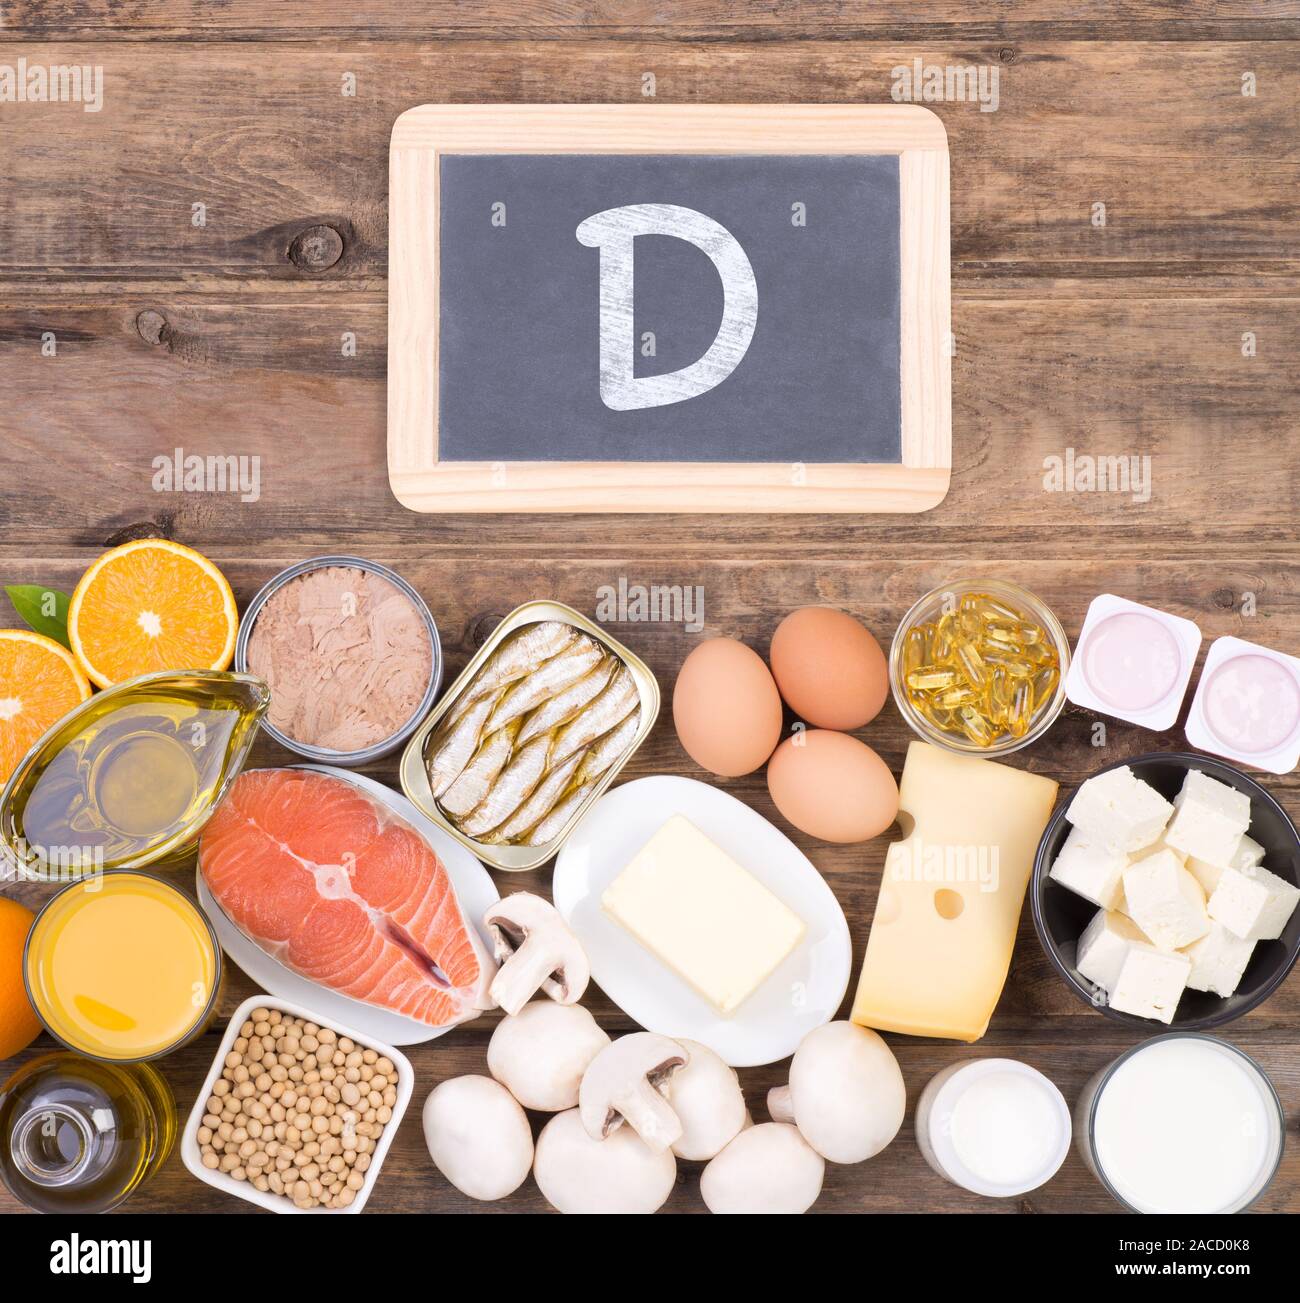 Vitamine D food sources, top view on wooden background Stock Photo